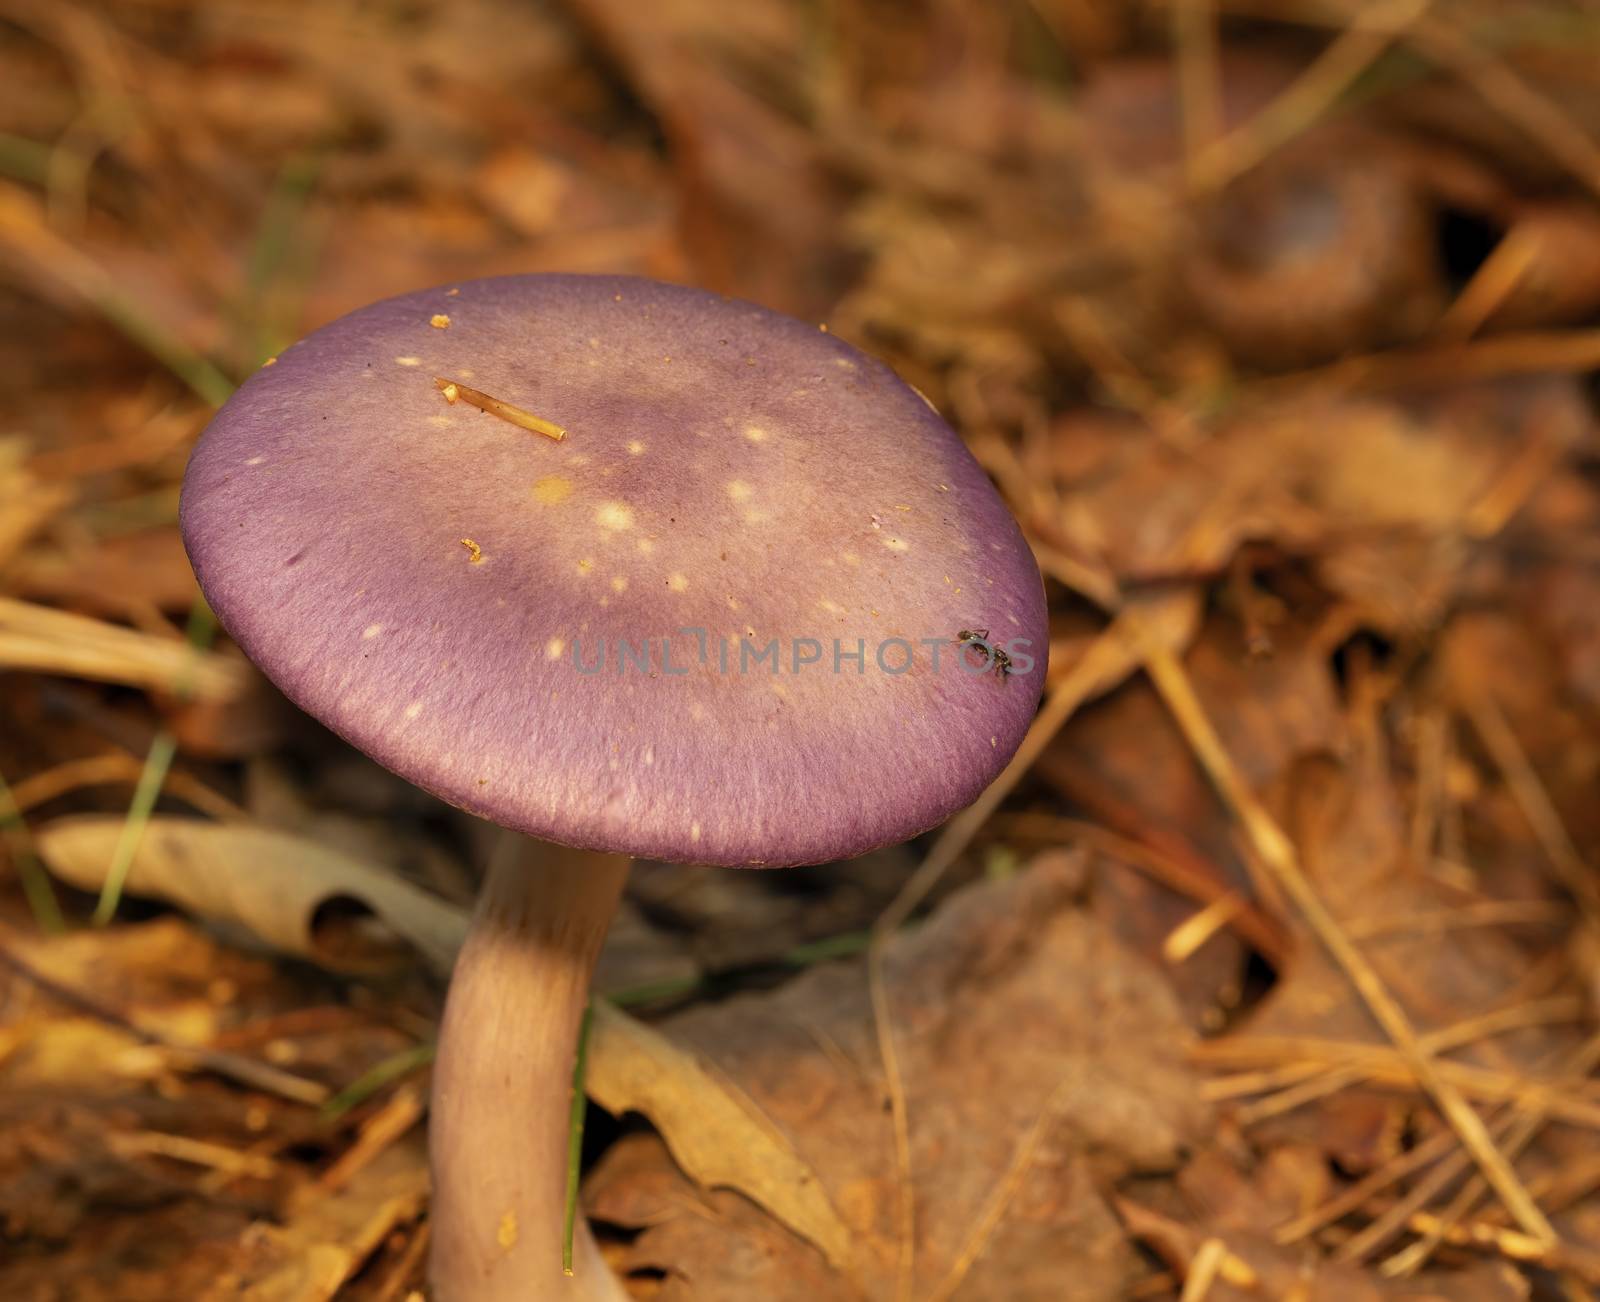 Purple-Capped Mushroom Emerges from Forest Floor by CharlieFloyd